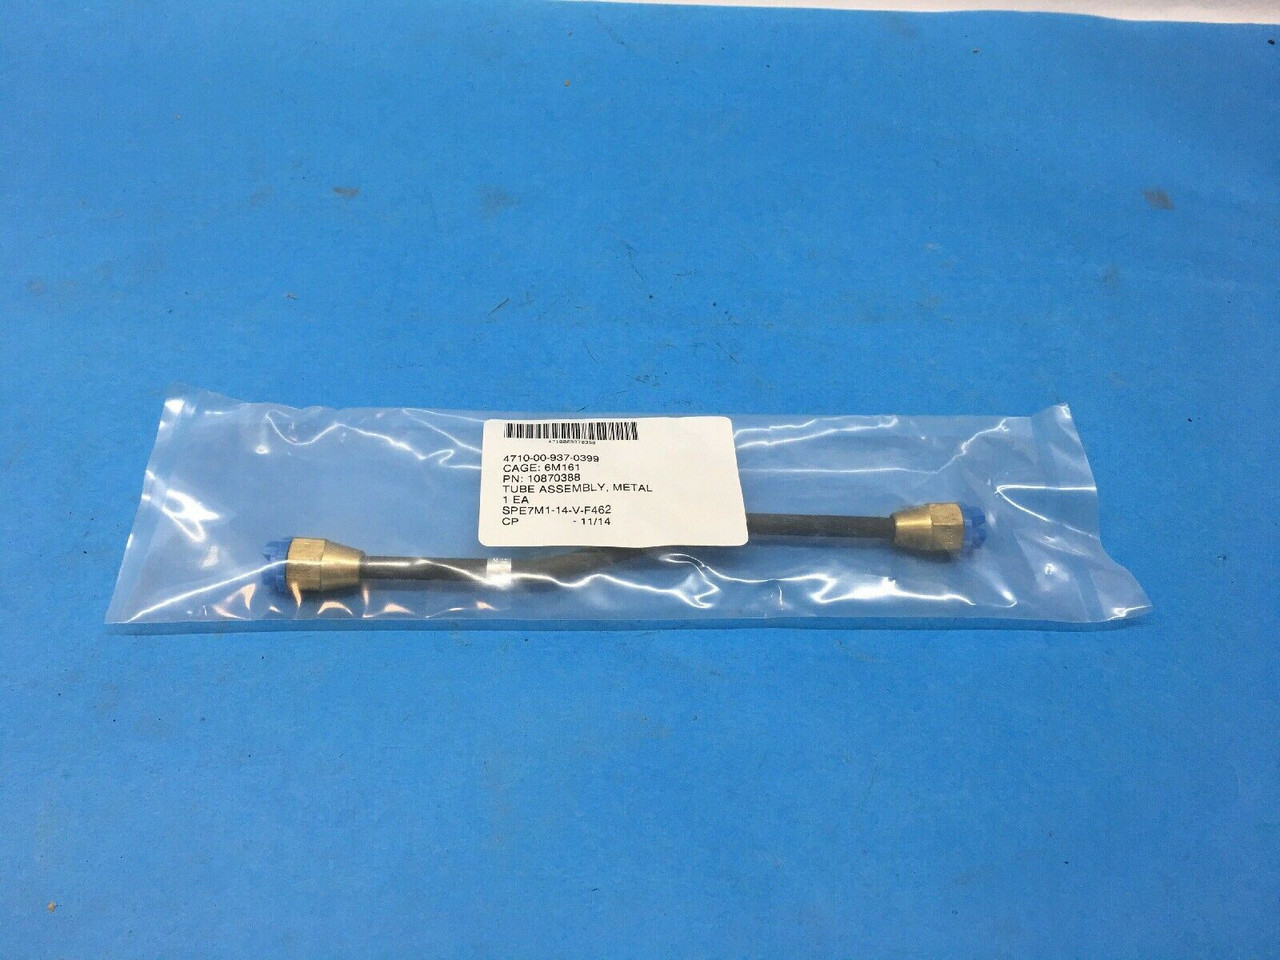 Metal Tube Assembly 10870388 Steel